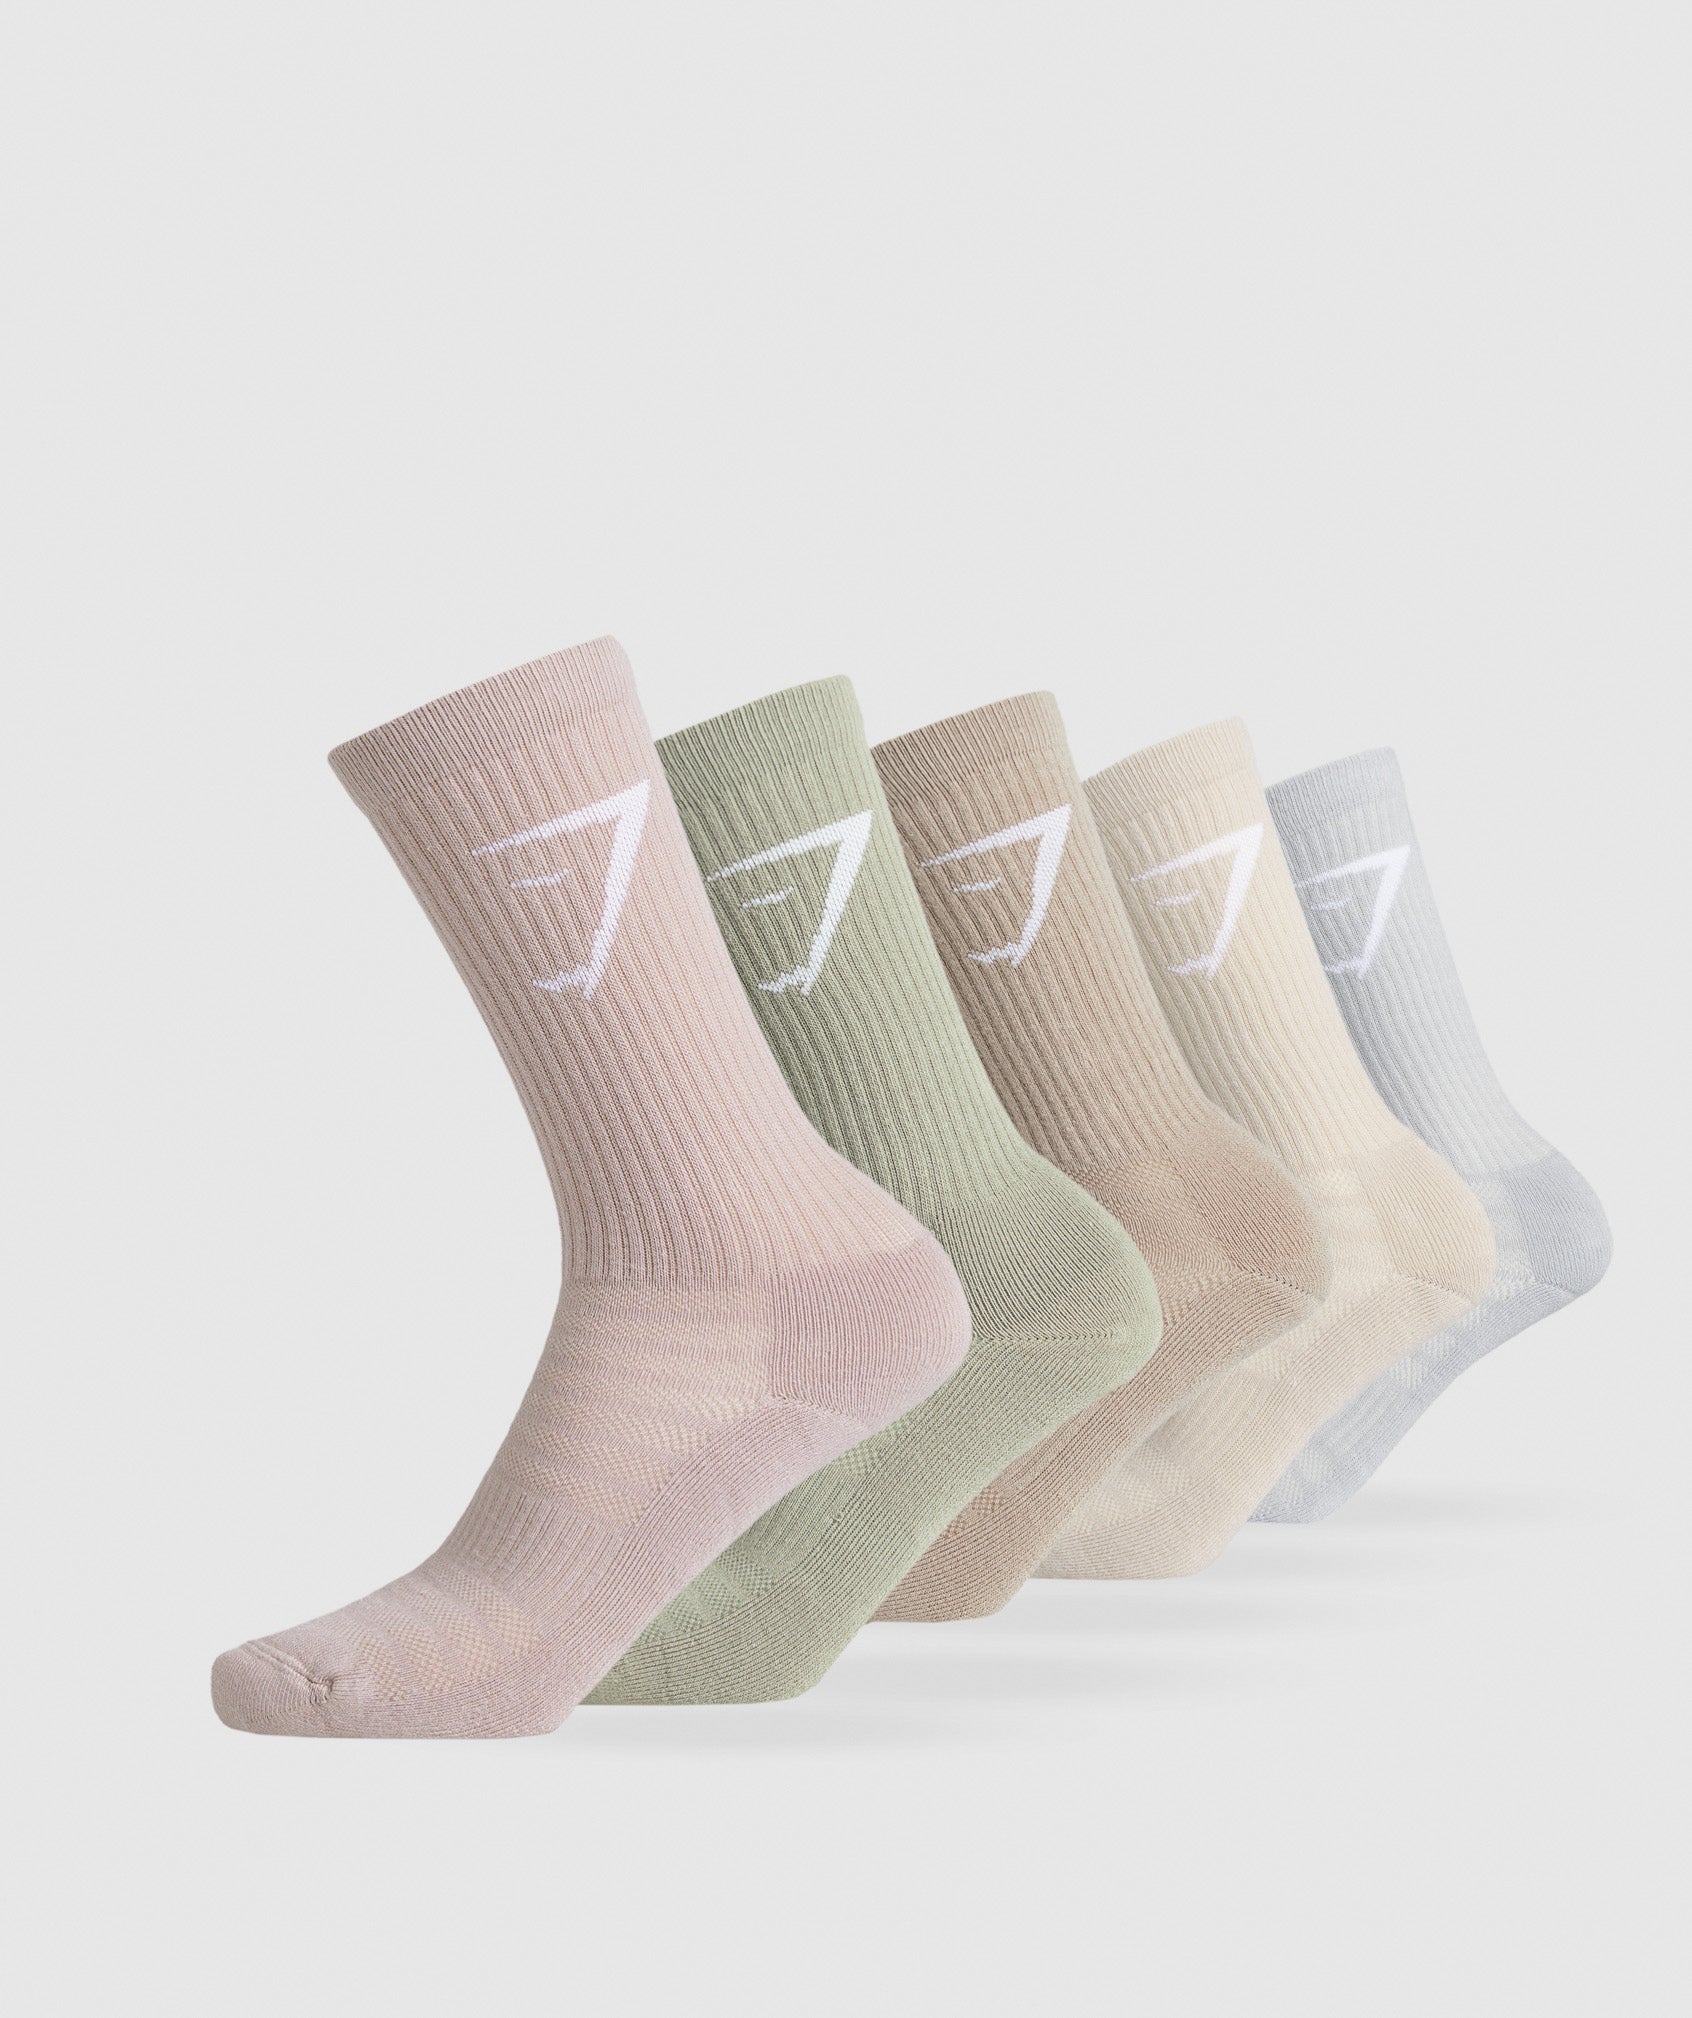 Crew Socks 5pk in {{variantColor} is out of stock